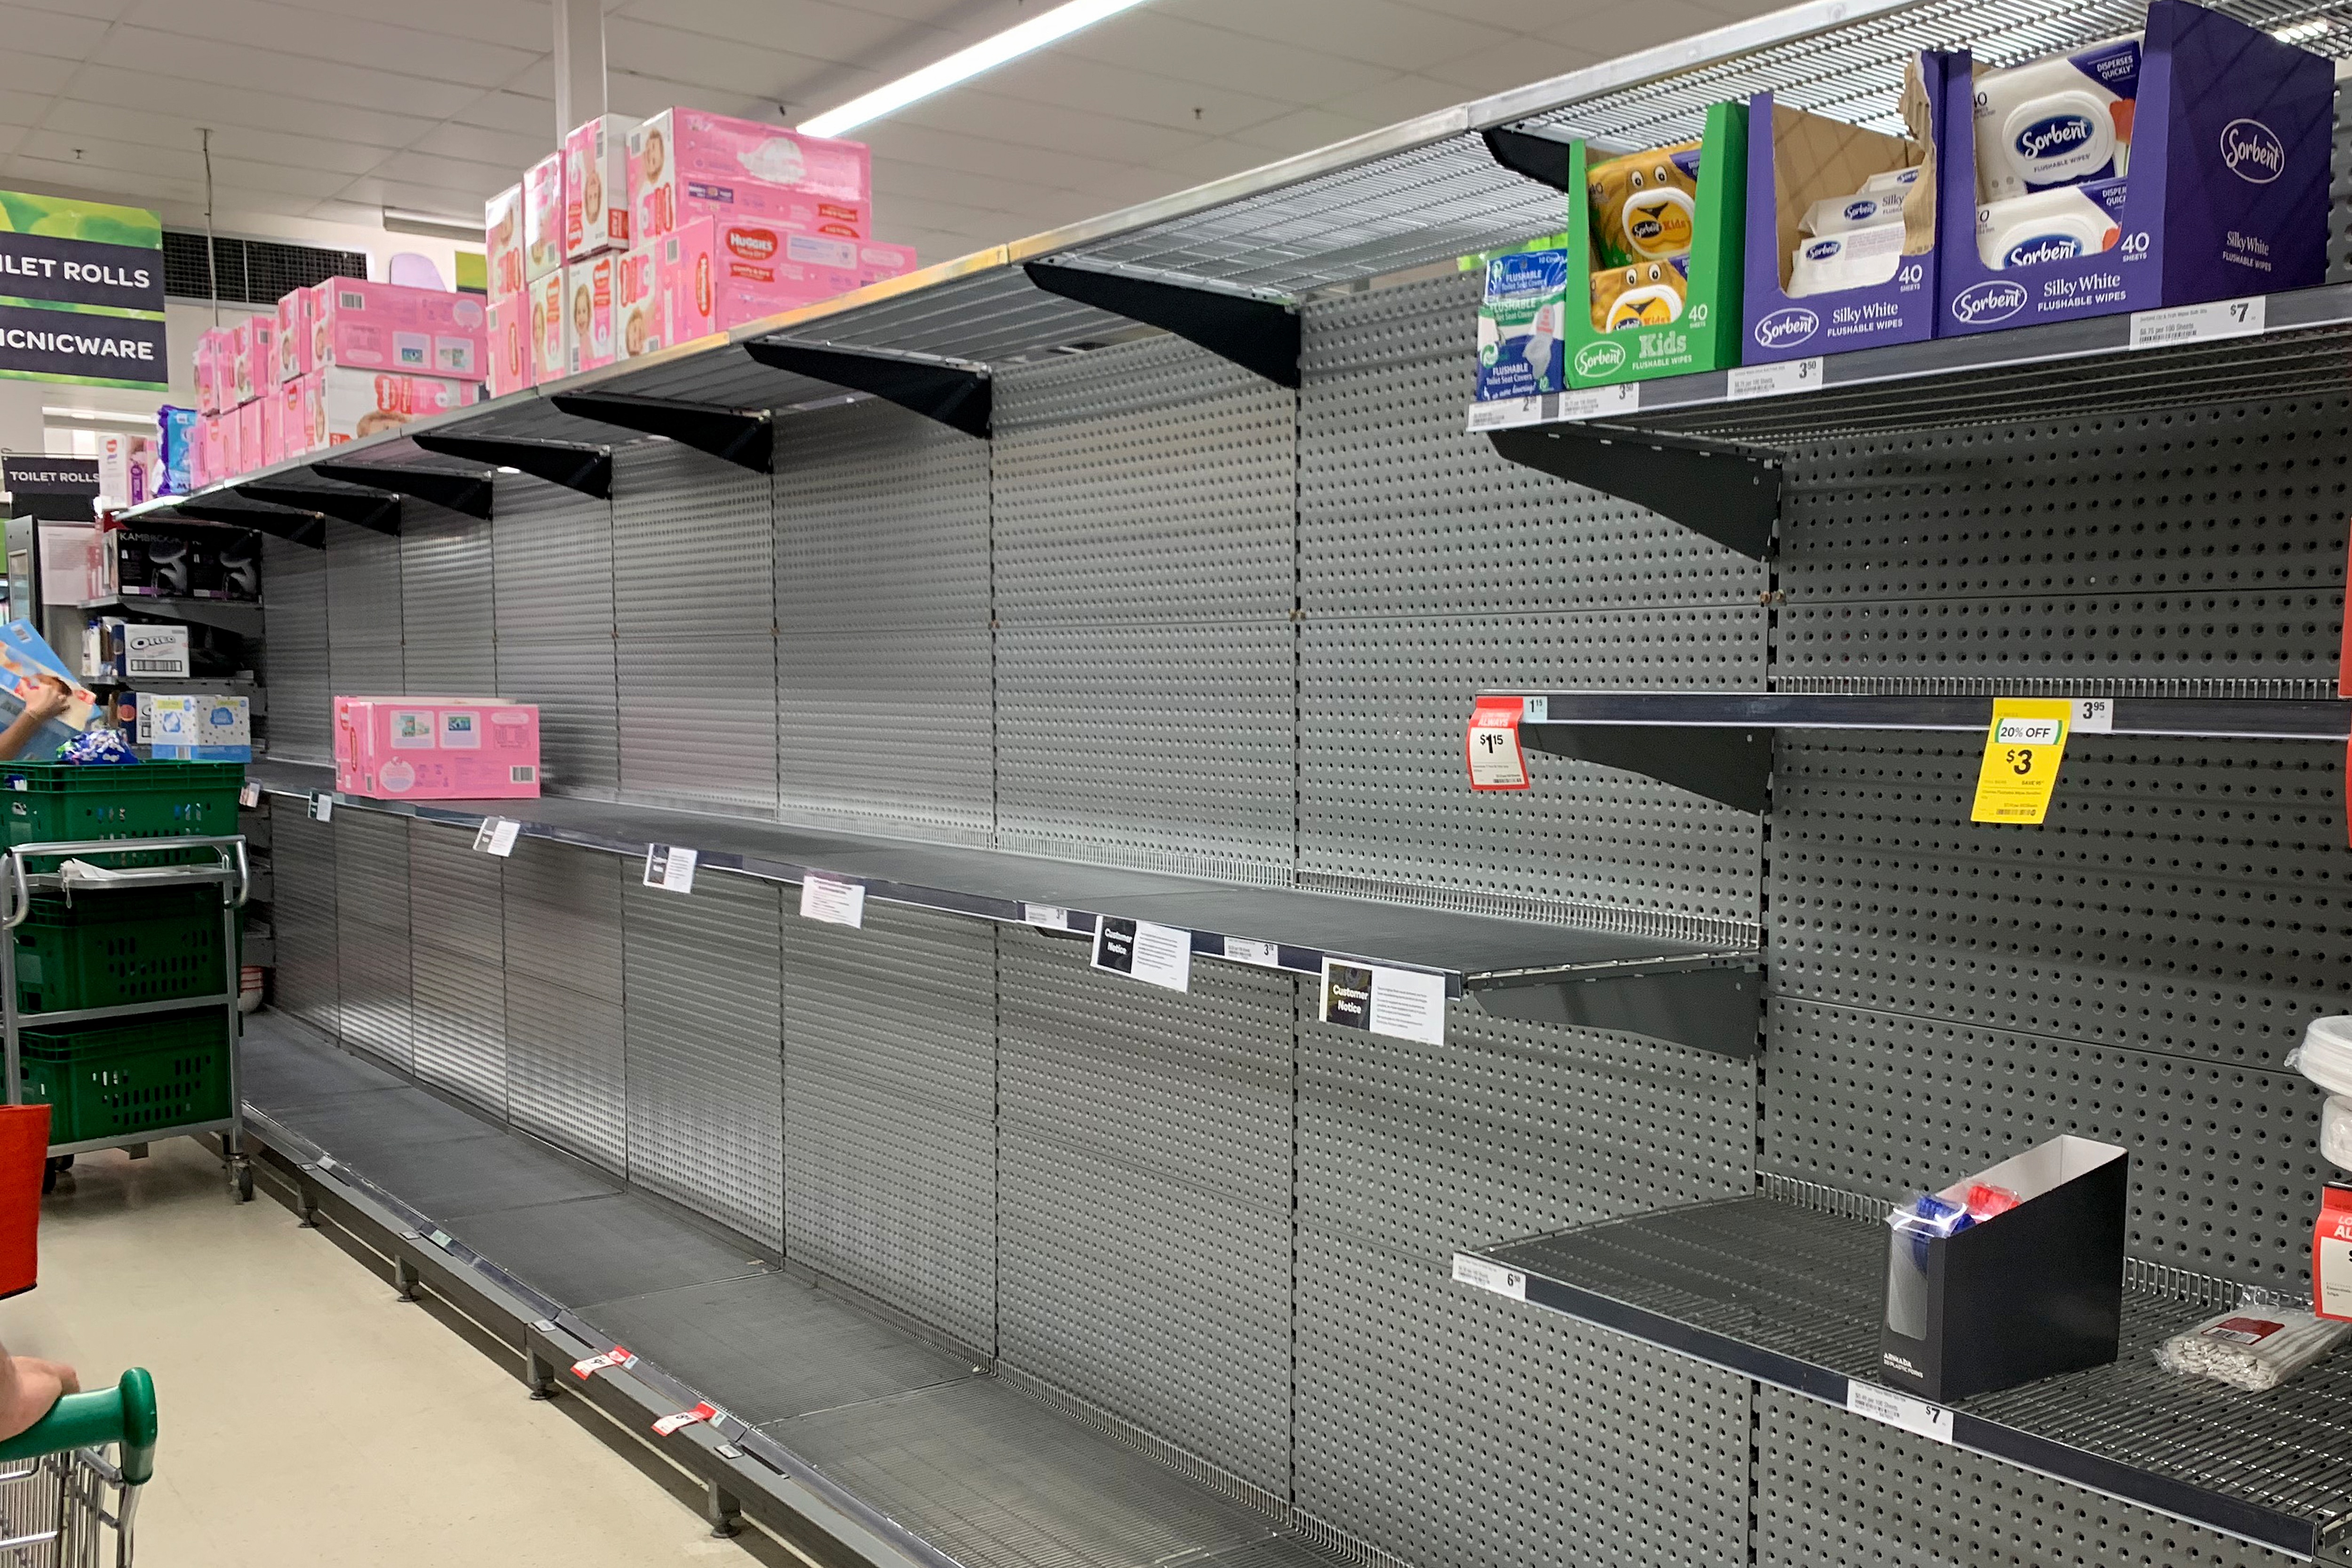 Empty shelves that were once stocked with toilet paper are seen in Balmain Woolworths, Sydney, Saturday, March 7, 2020